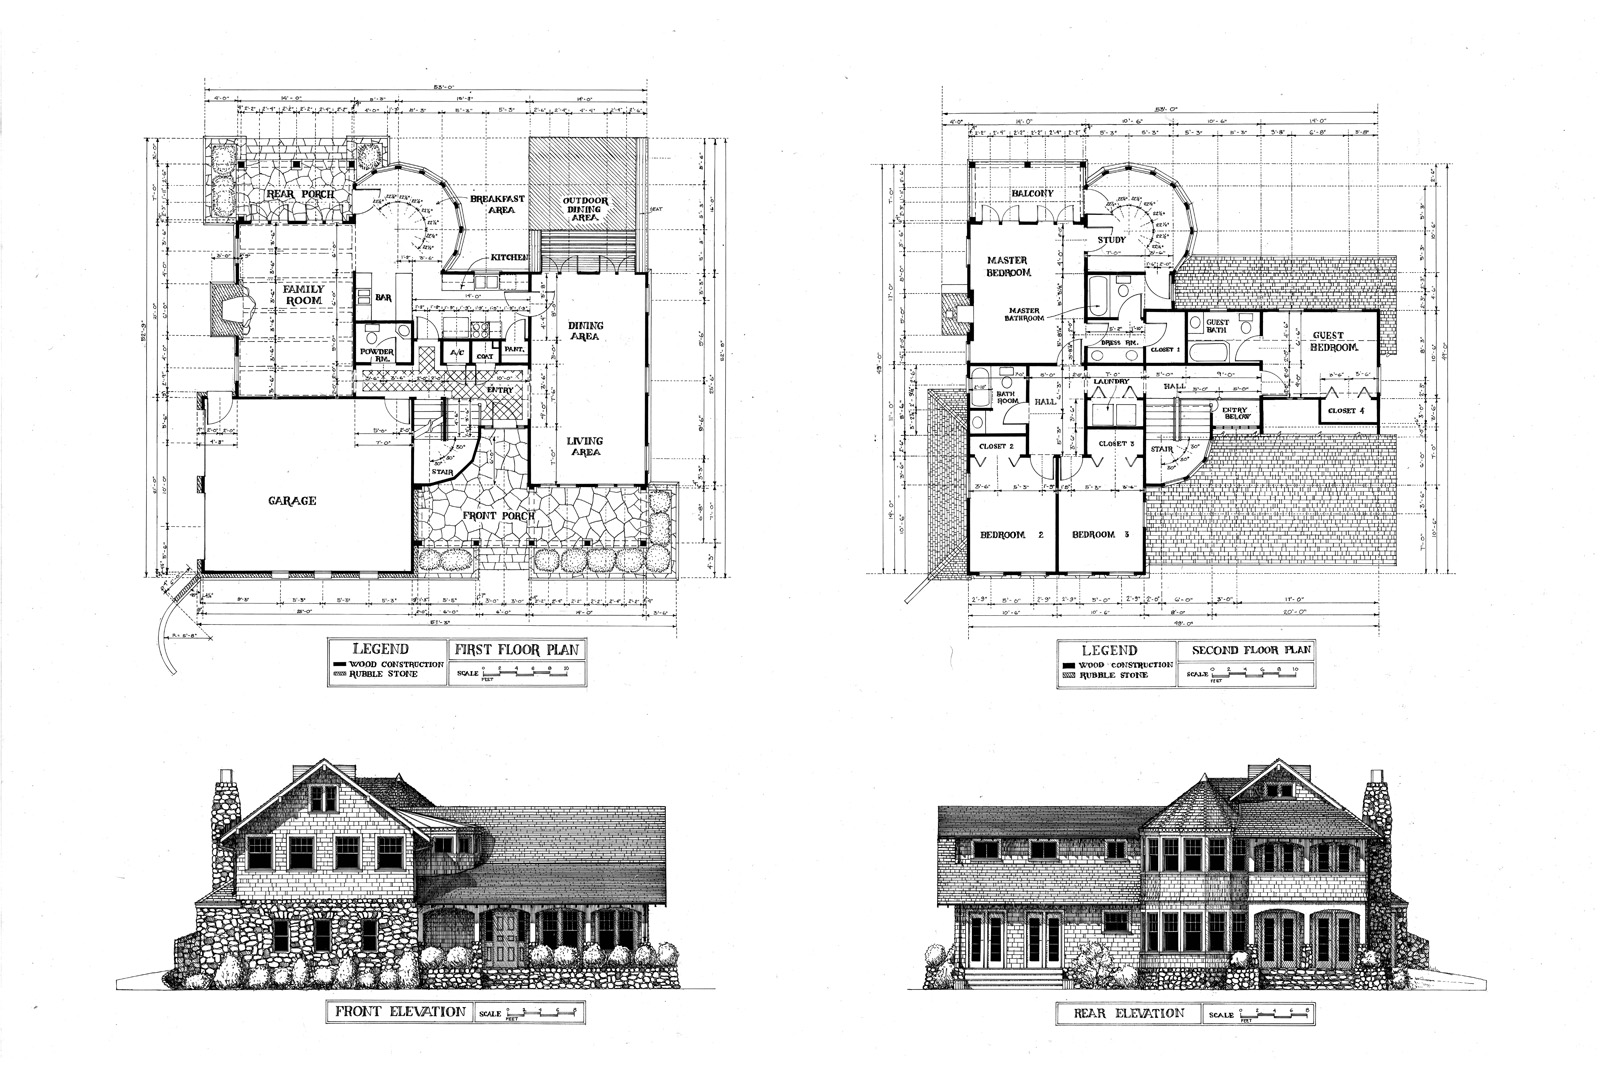 house floor plan with dimensions and elevations